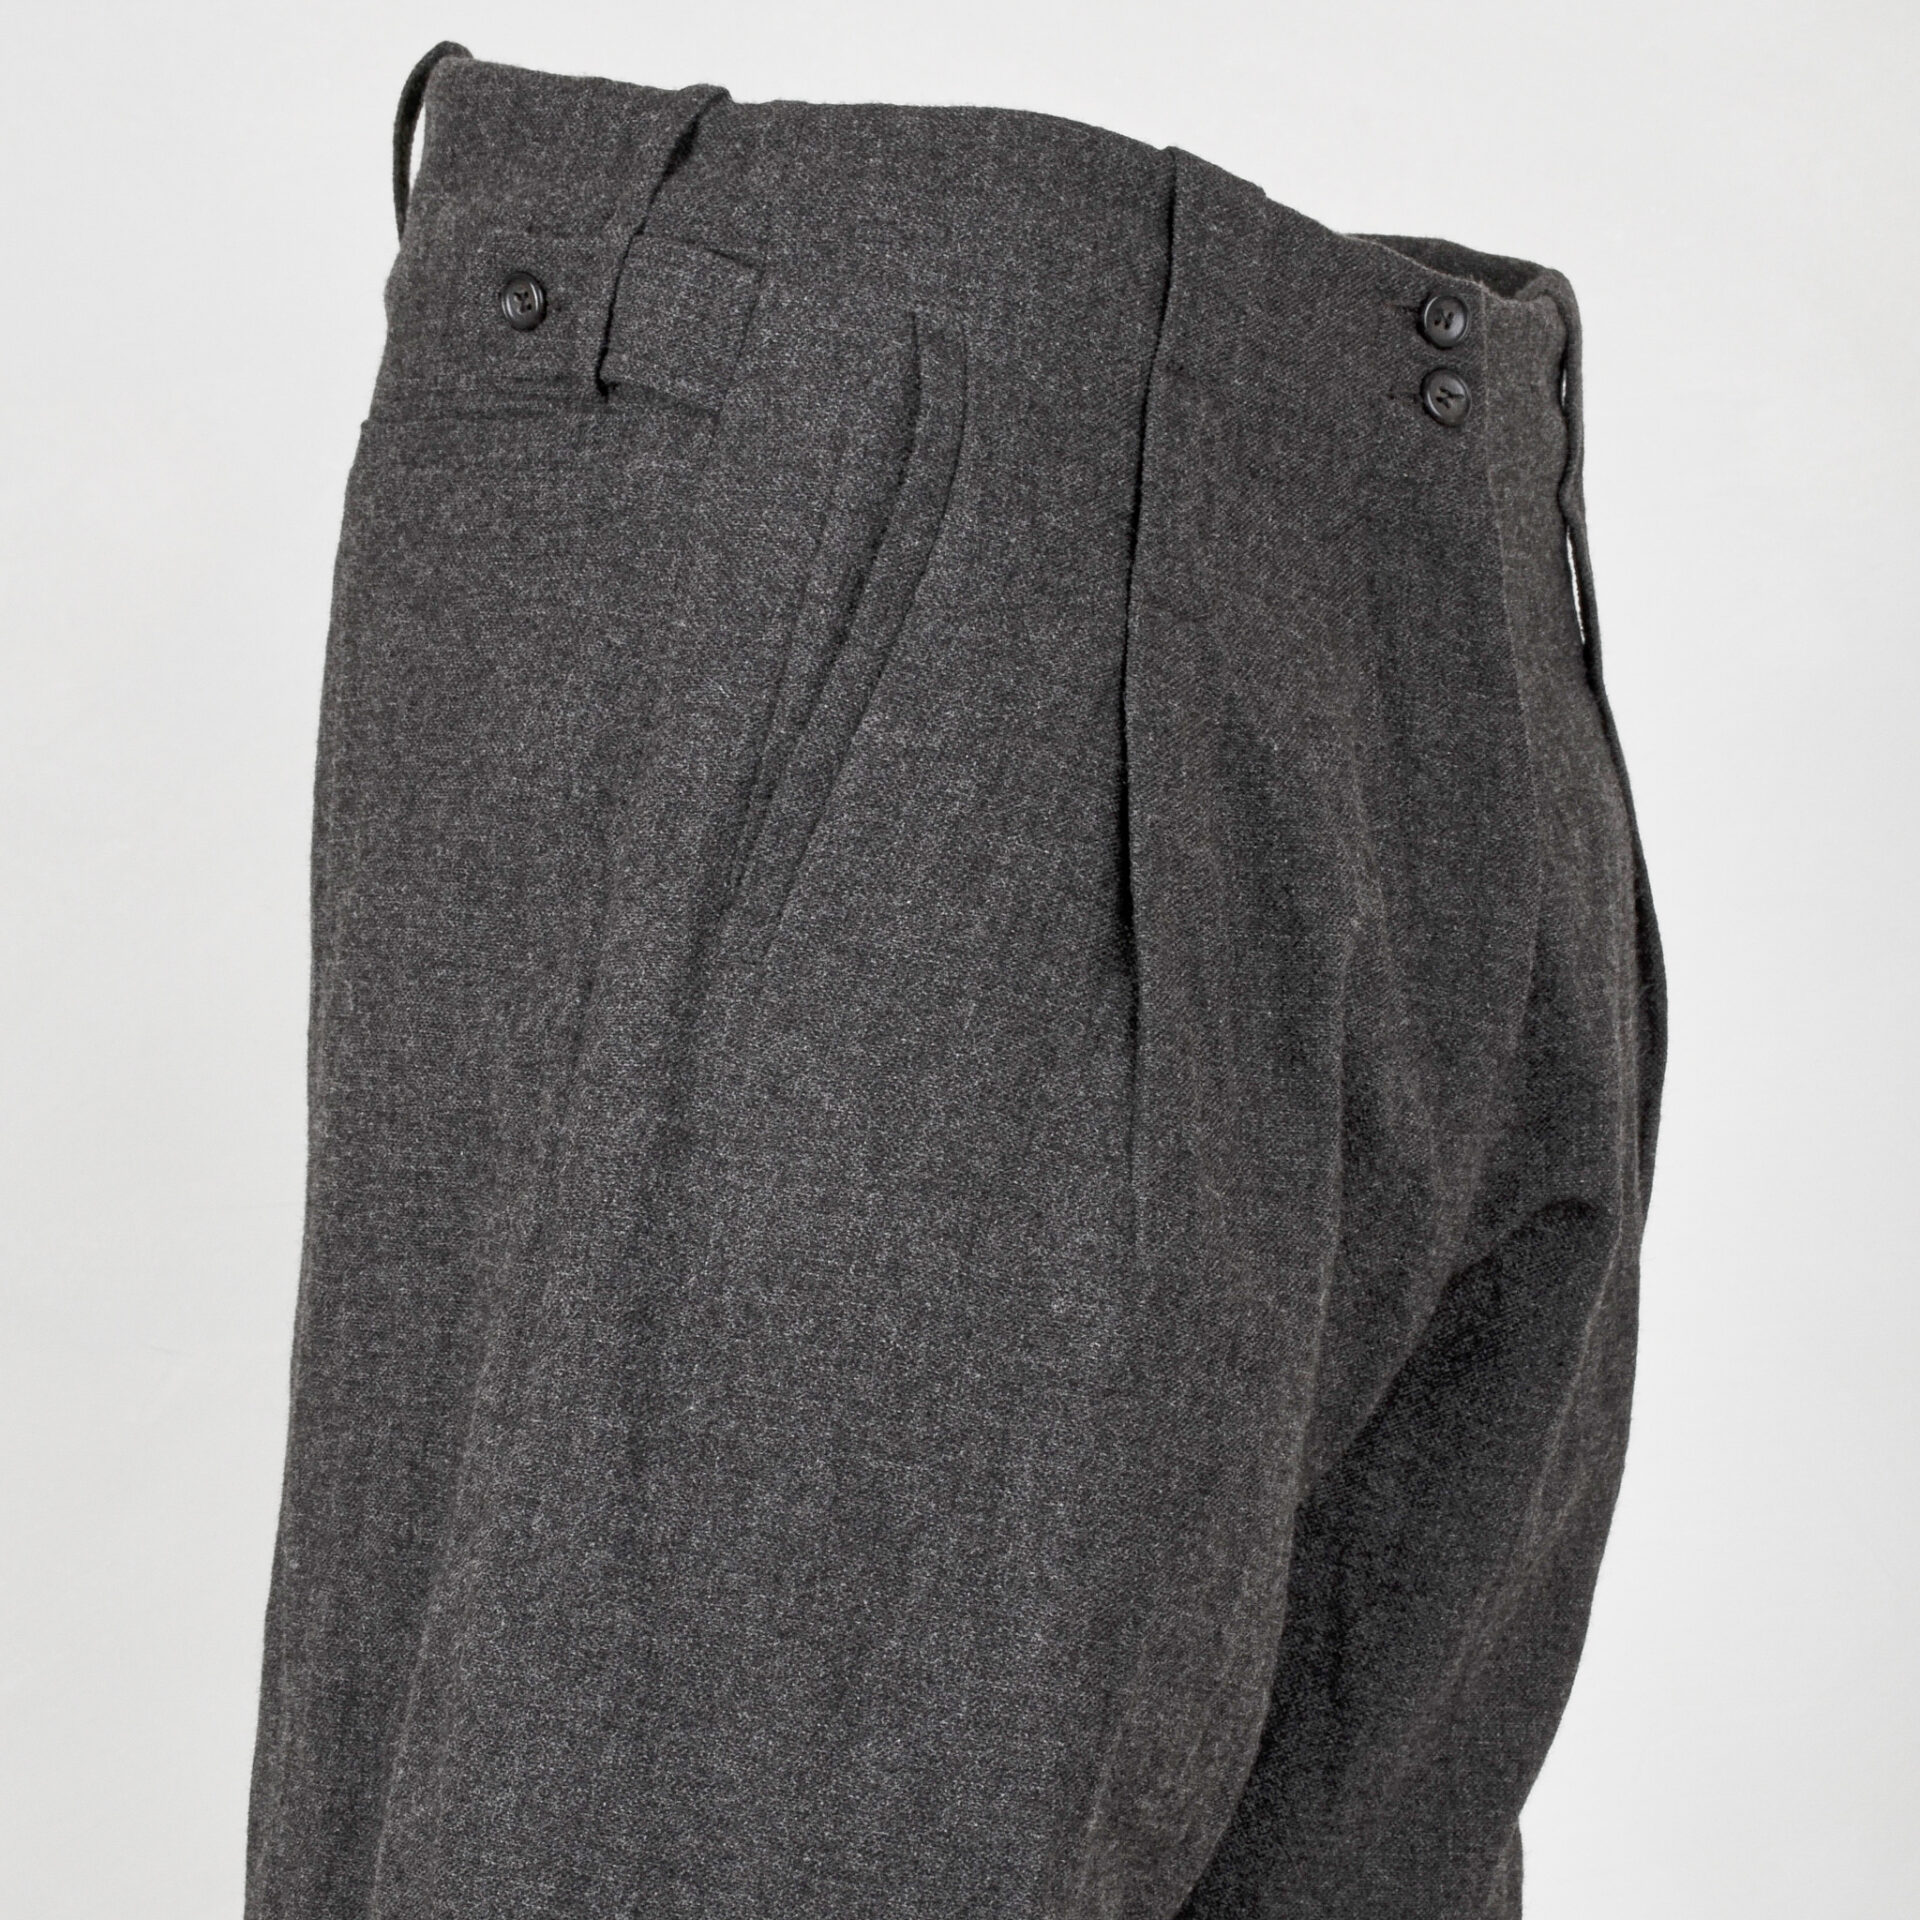 Grey Trousers | Buy Grey Trousers Online in India at Best Price